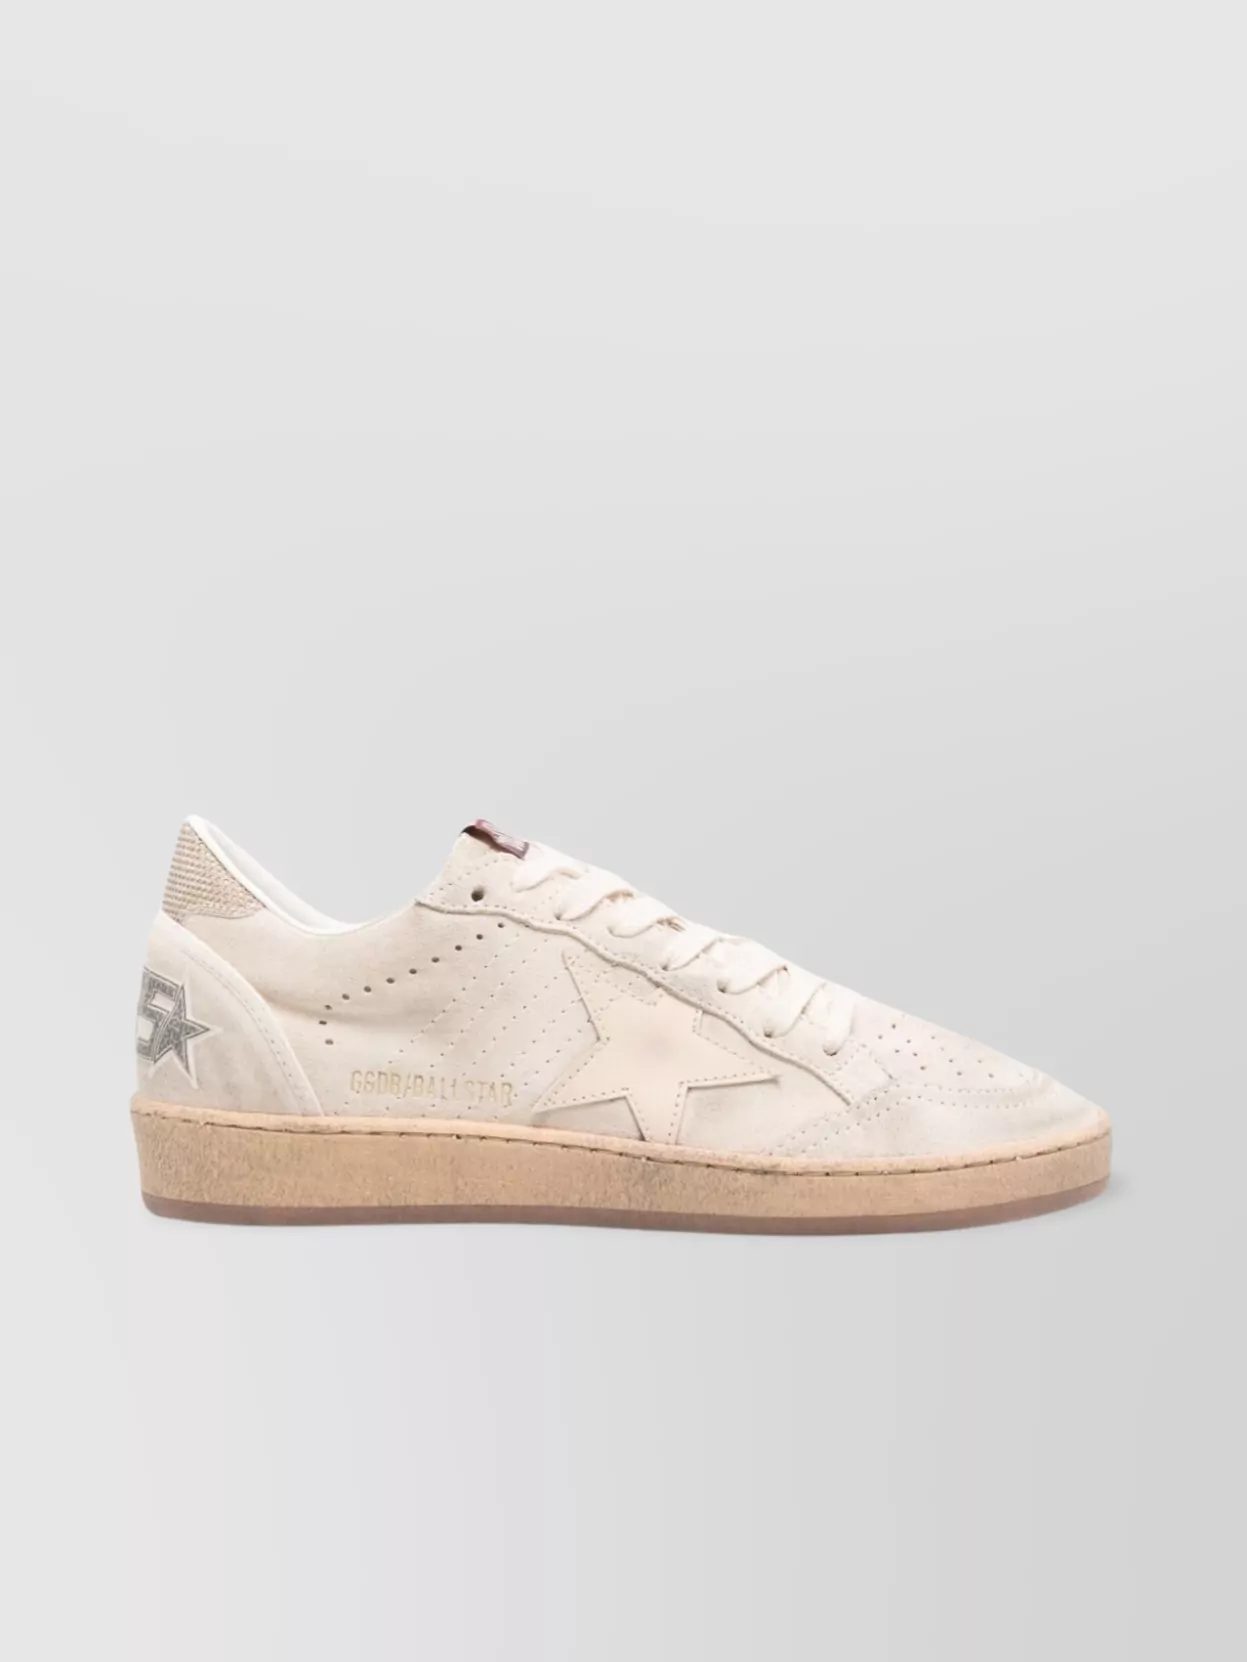 Shop Golden Goose Distressed Rubber Sole Sneakers